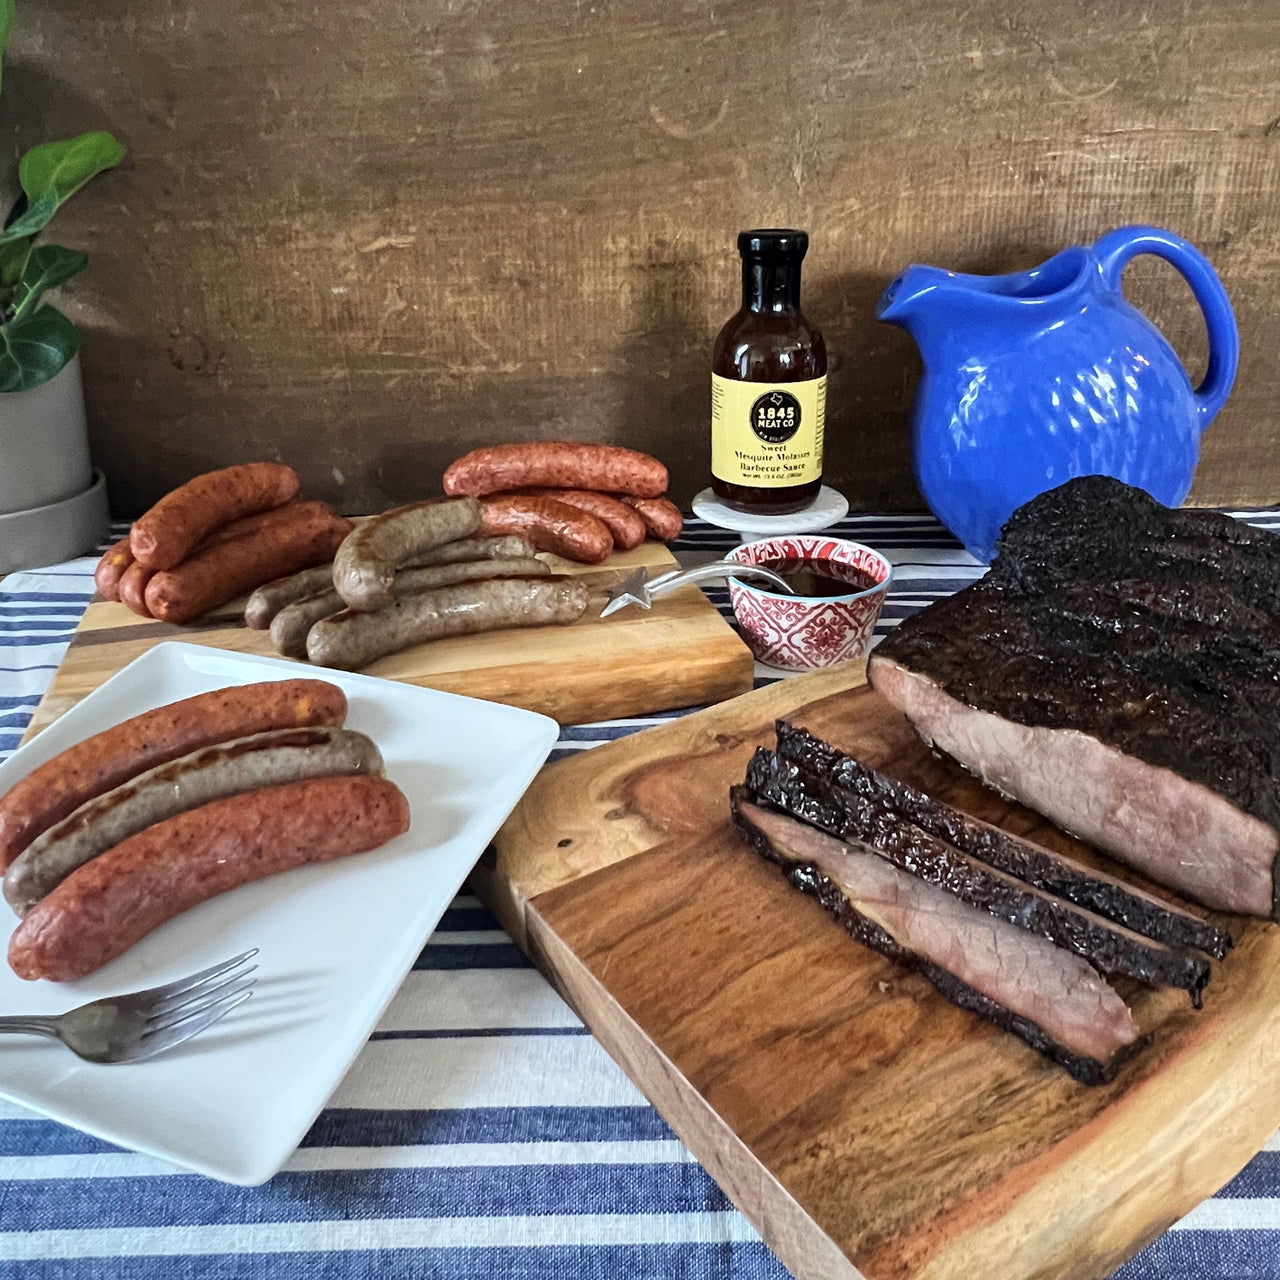 An assortment of items that will make your next gathering or picnic a success.  Includes:  4 - 6 lbs. Smoked Beef Brisket 16 oz. Smoked Pork & Beef Sausage 16 oz. Bratwurst 16 oz. Smoked Cheddar Sausage 13.5 oz. Jar of Sweet Molasses BBQ Sauce ﻿Item #80E